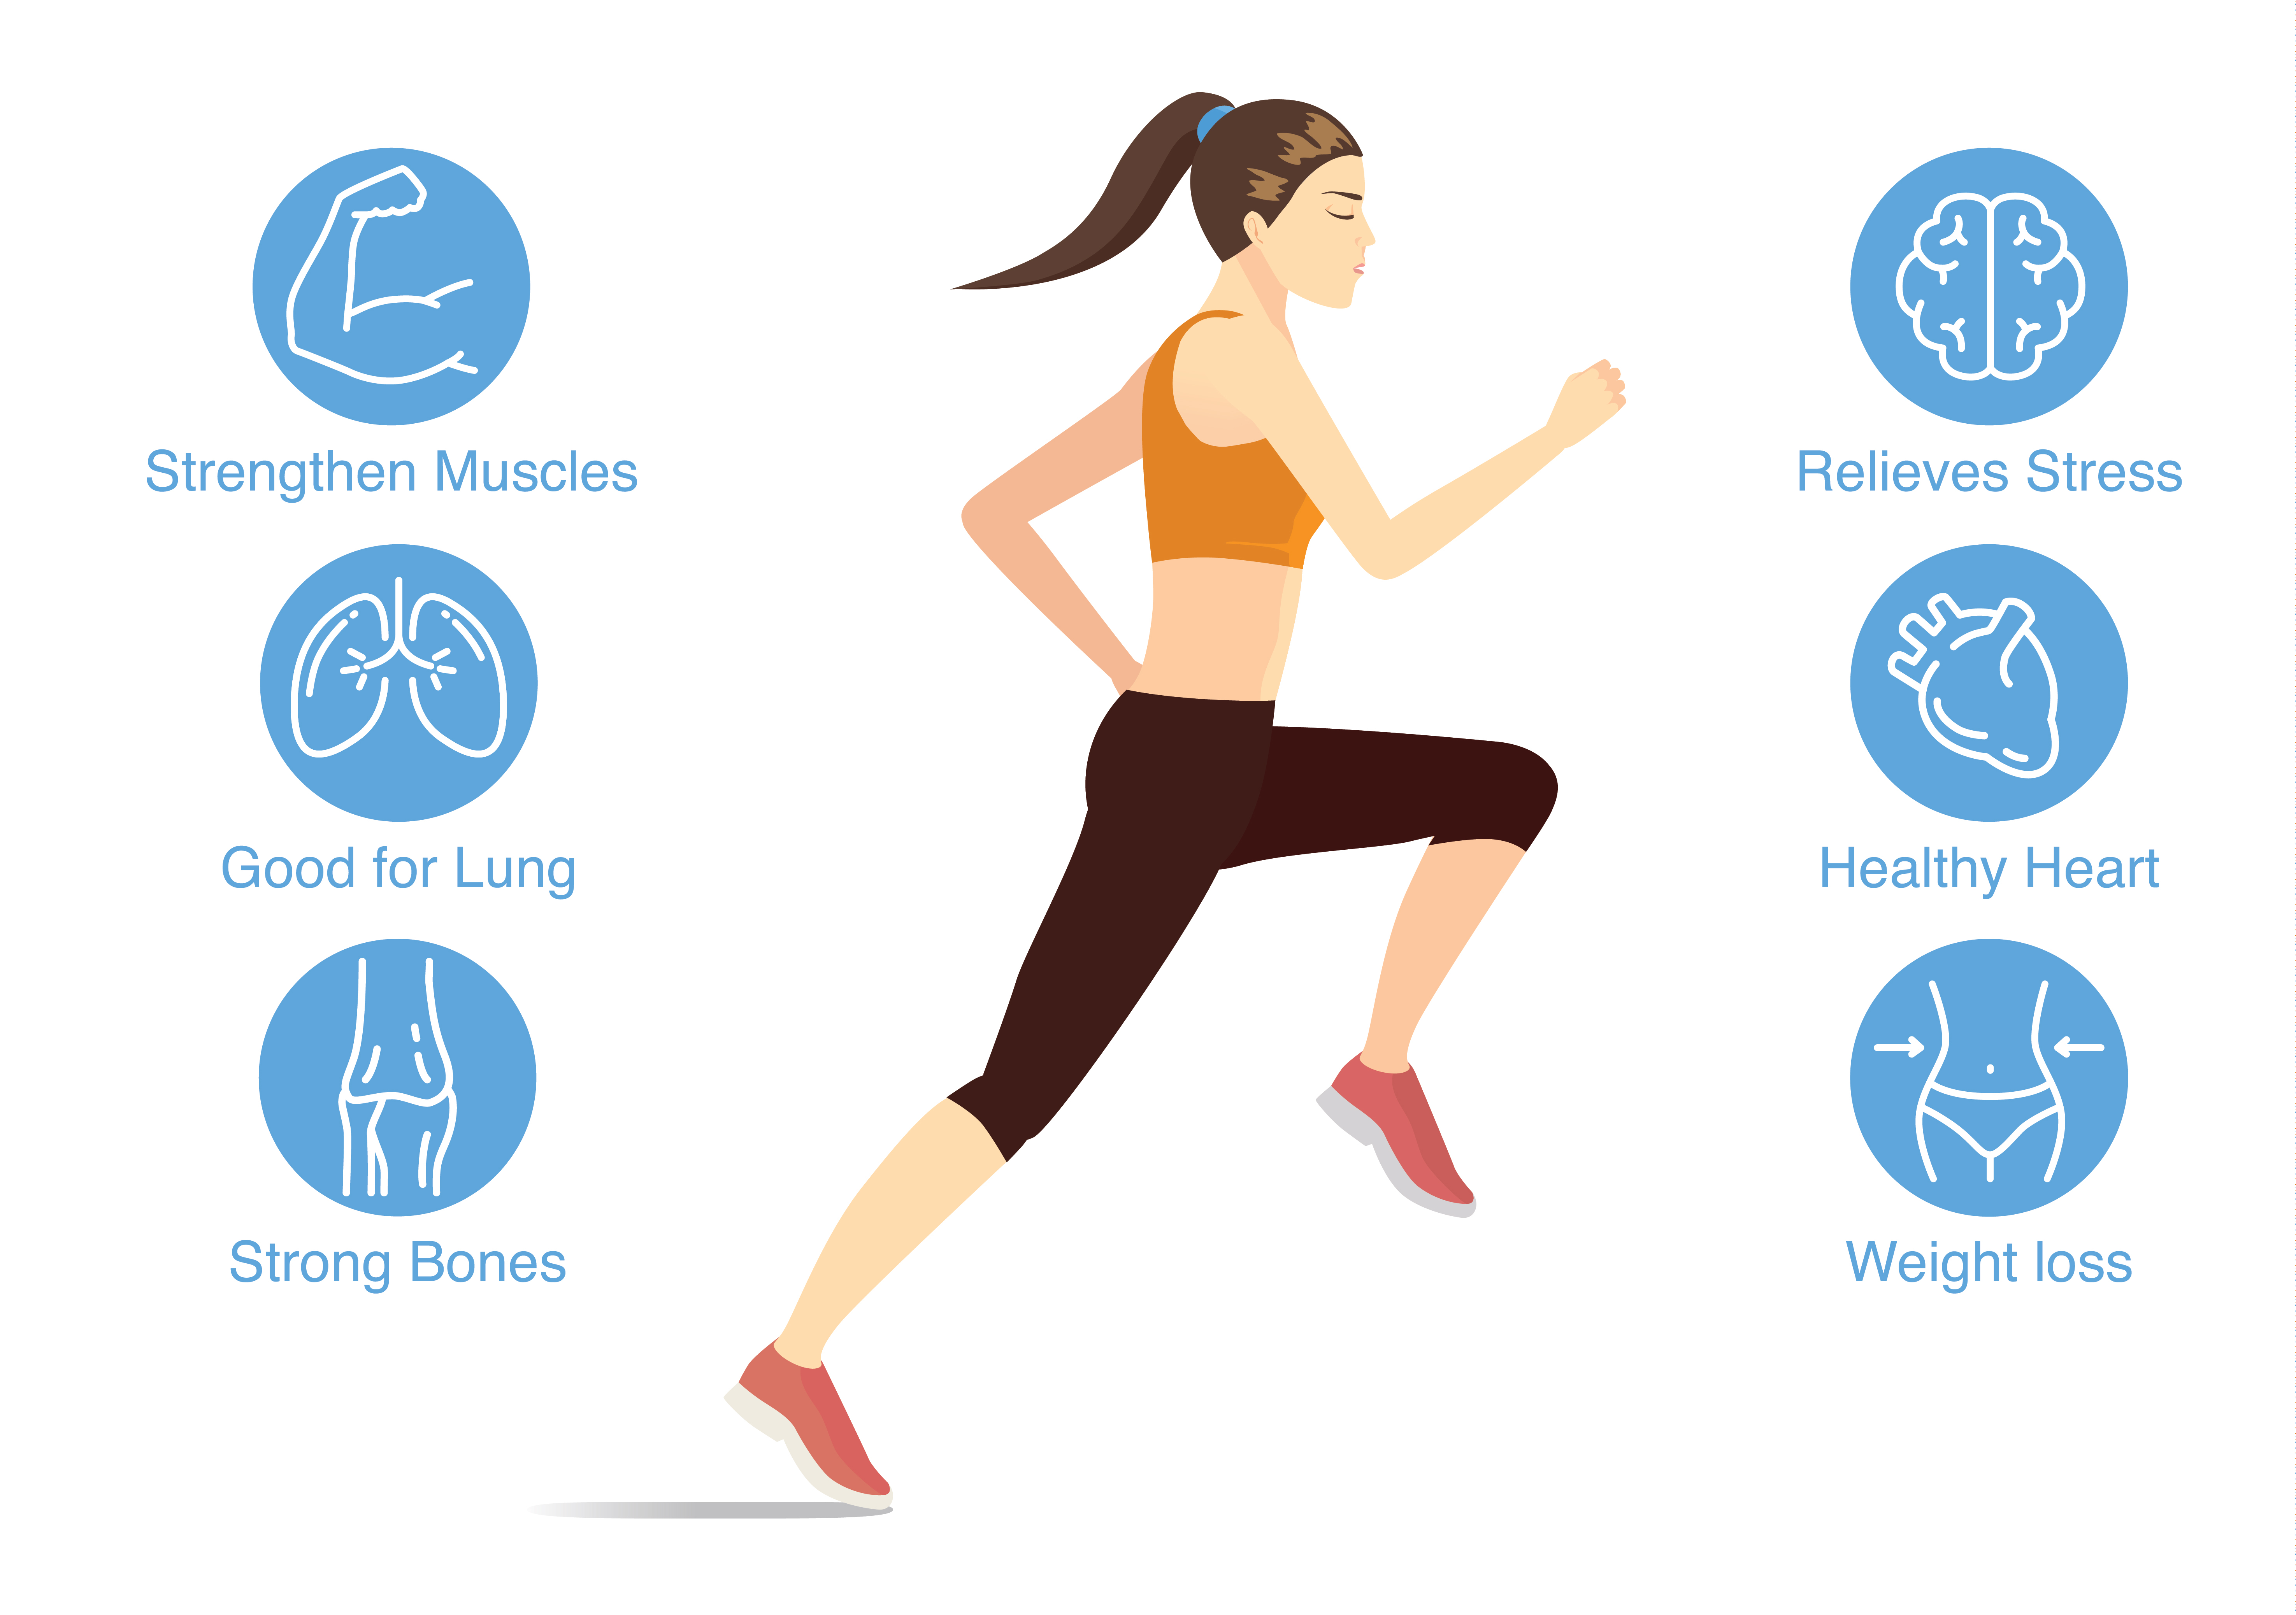 Benefits of running. Be sure to at least try it once!